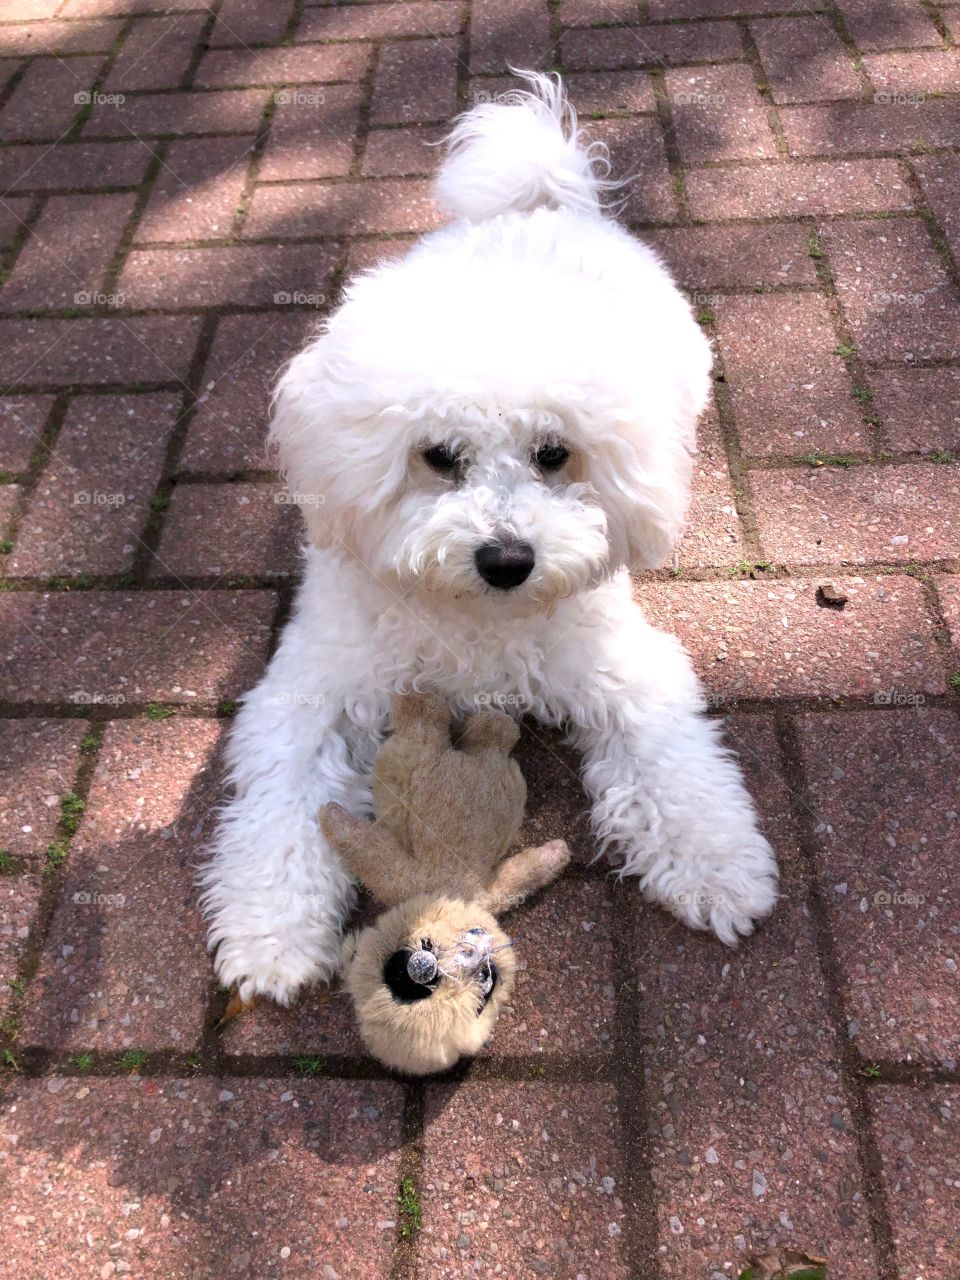 Dog and the doll,Let’s play